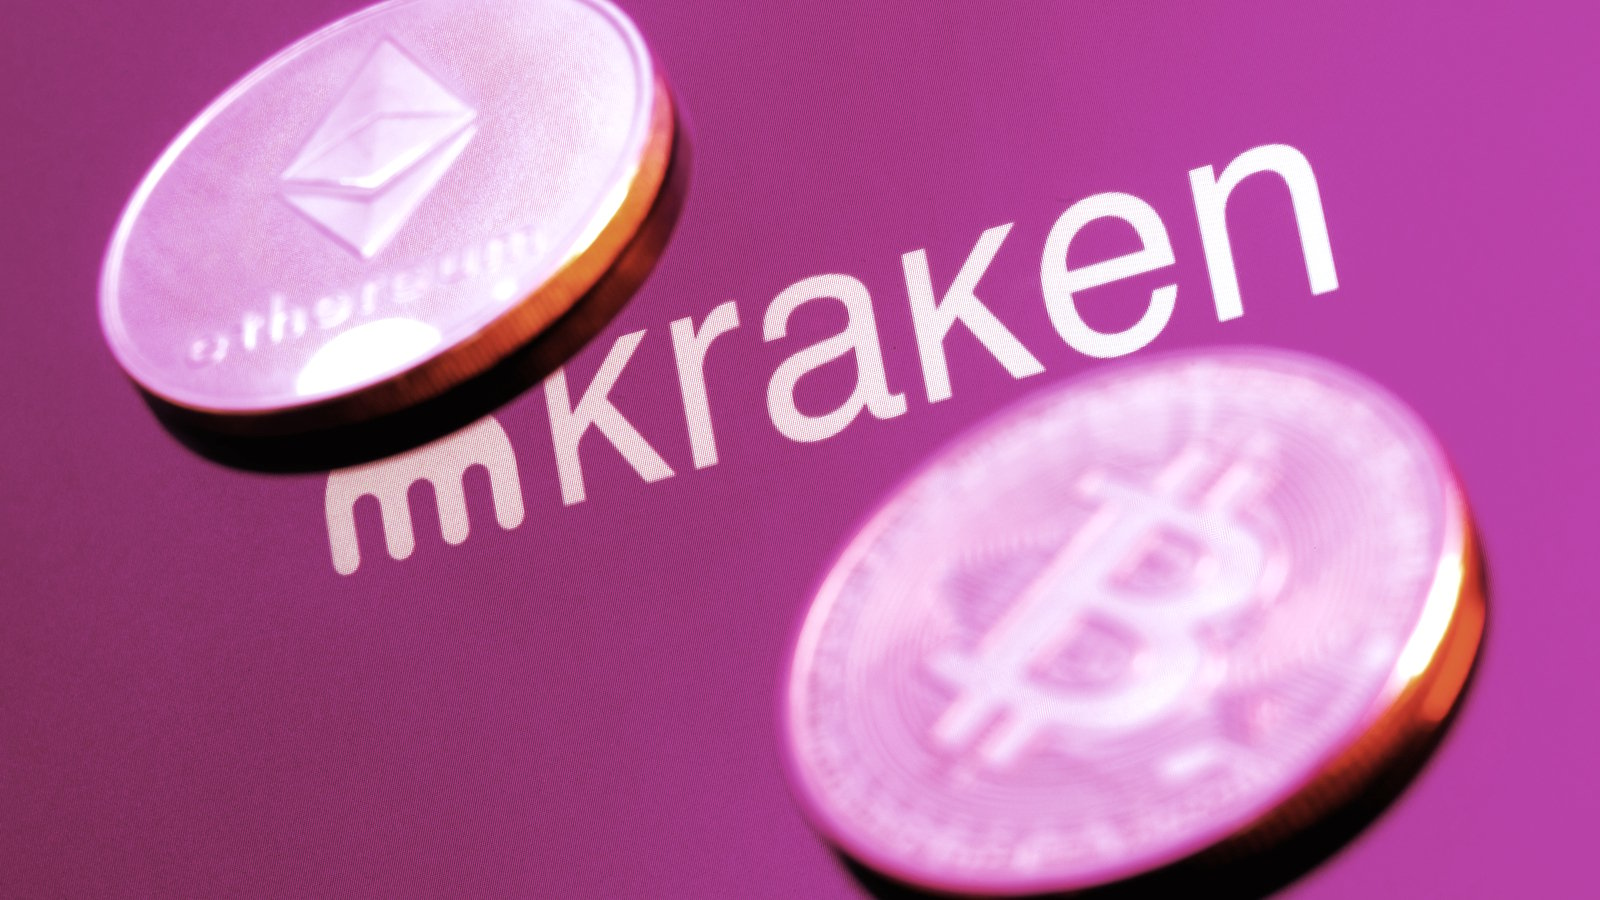 Kraken Joins List of Crypto Firms to Comply With EU Sanctions Against Russia